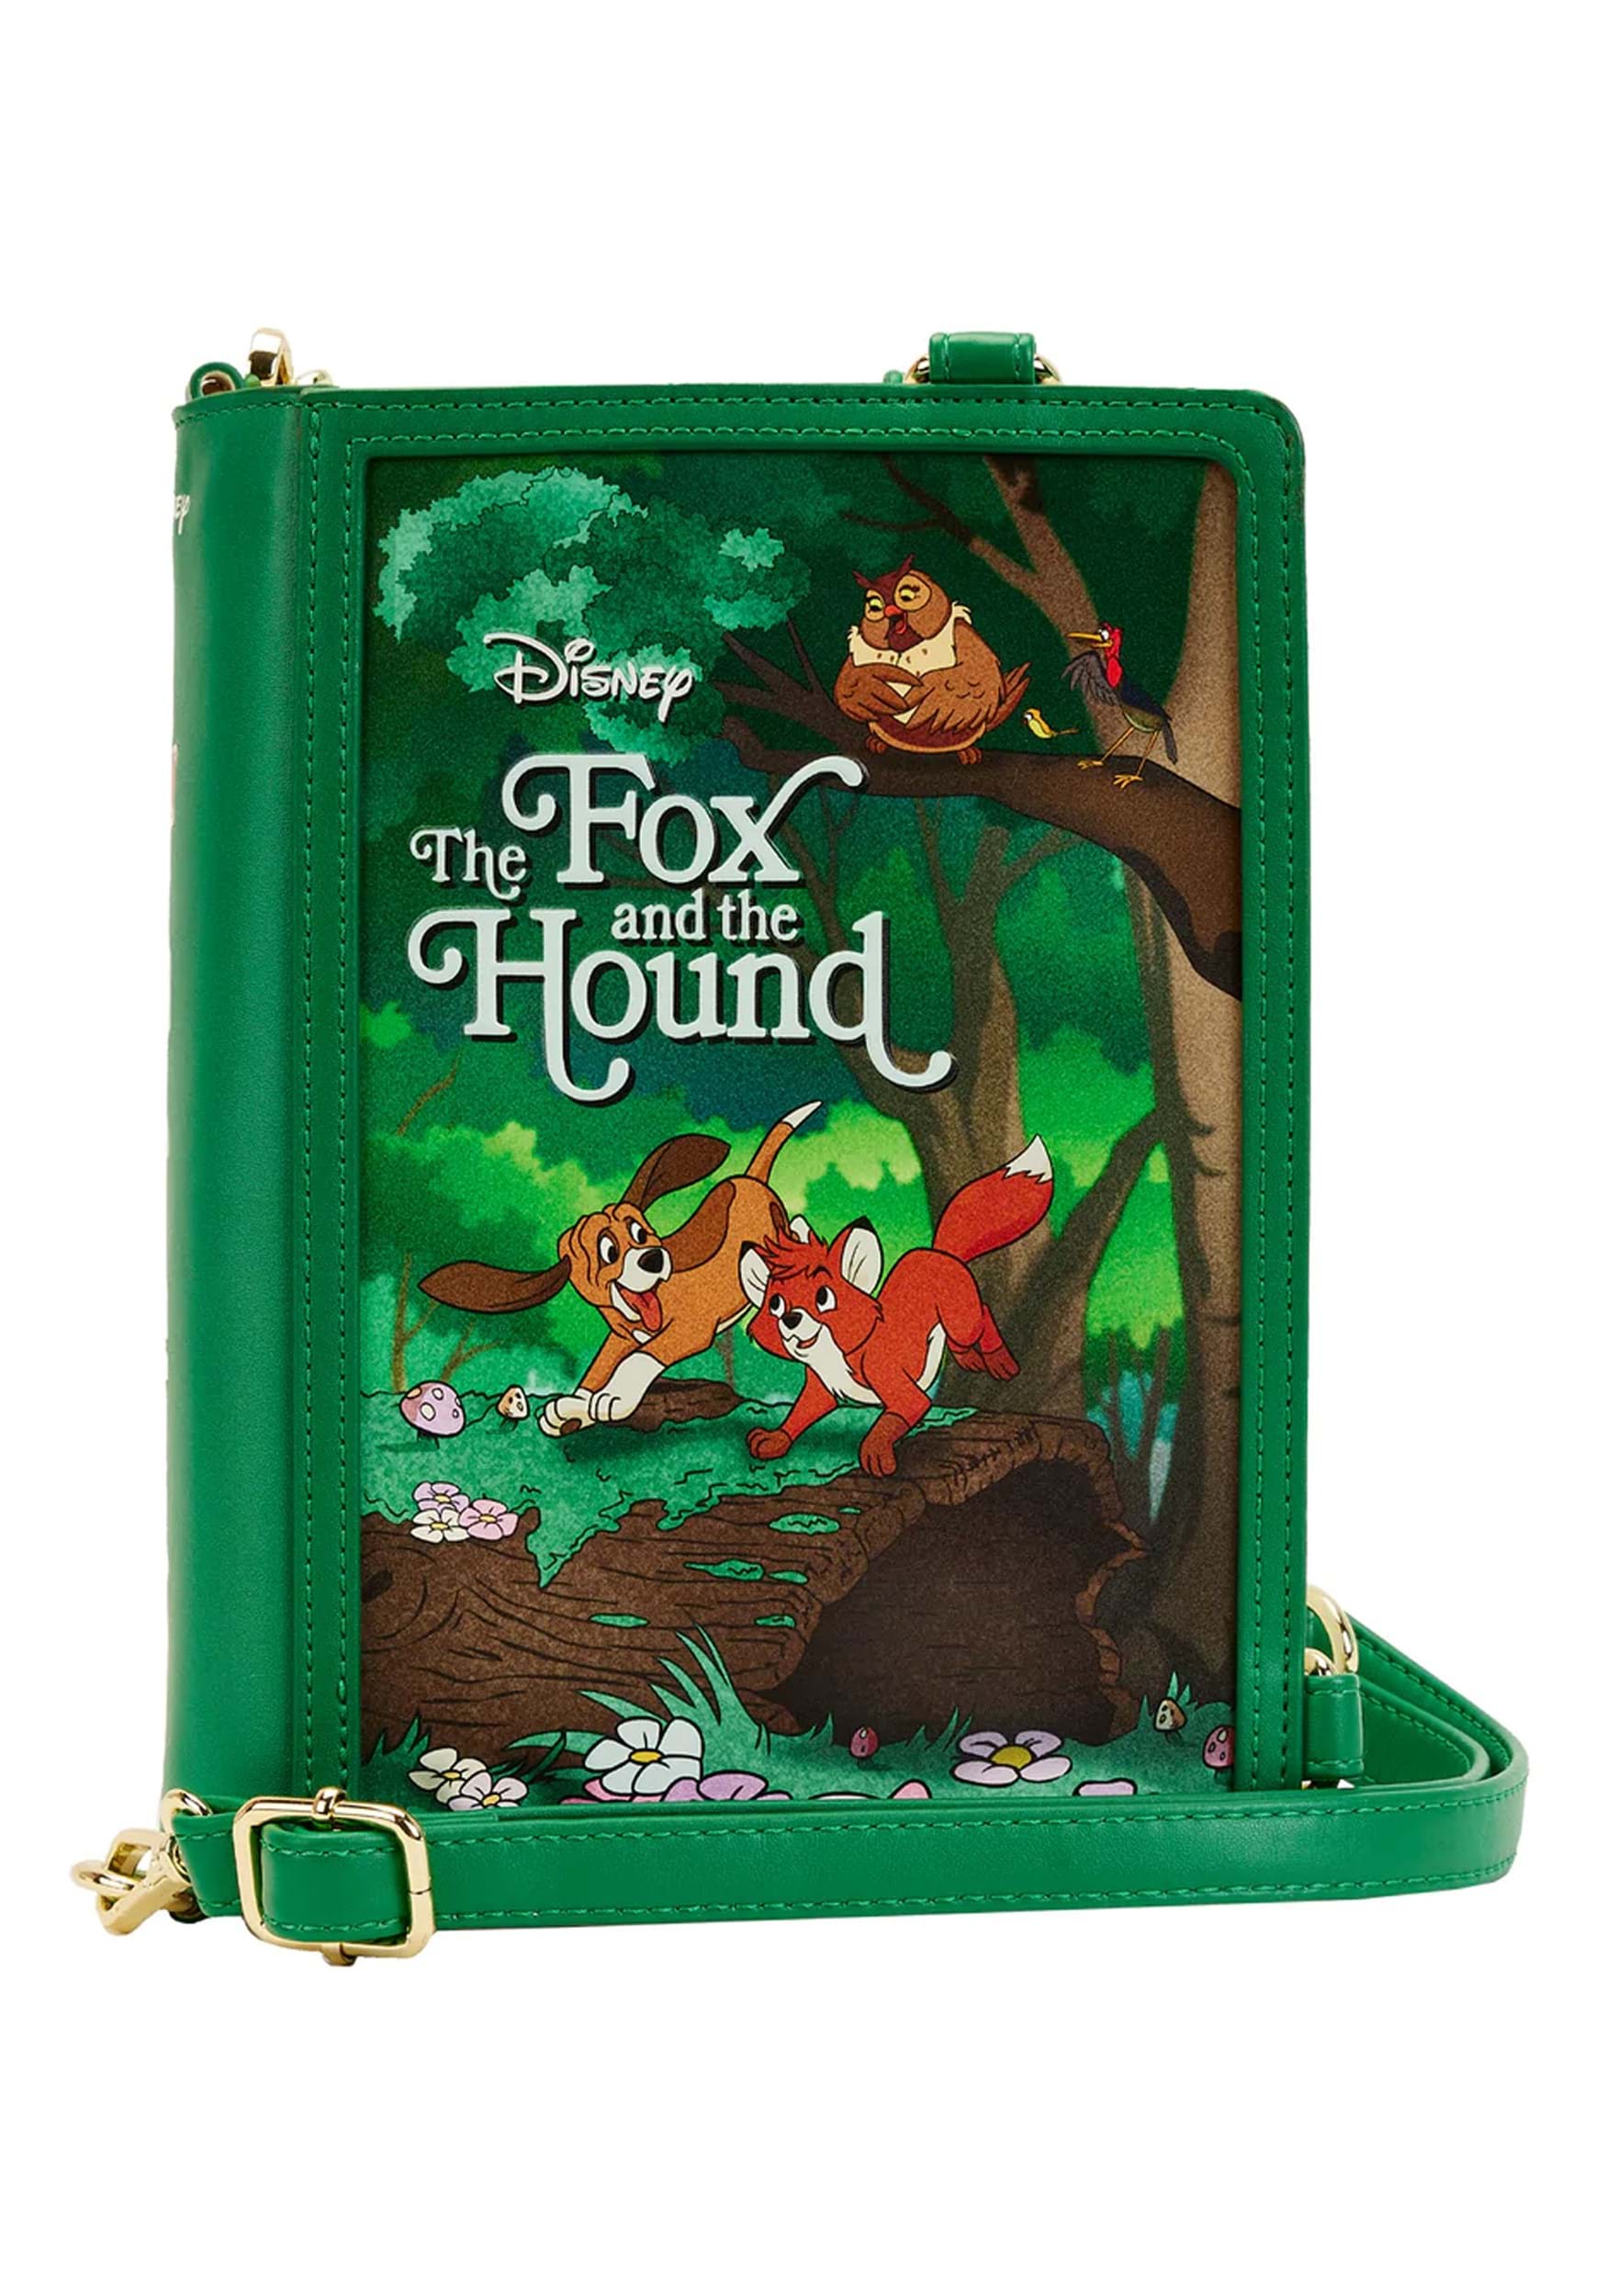 Loungefly Disney Fox and the Hound Classic Books Convertible Crossbody Purse